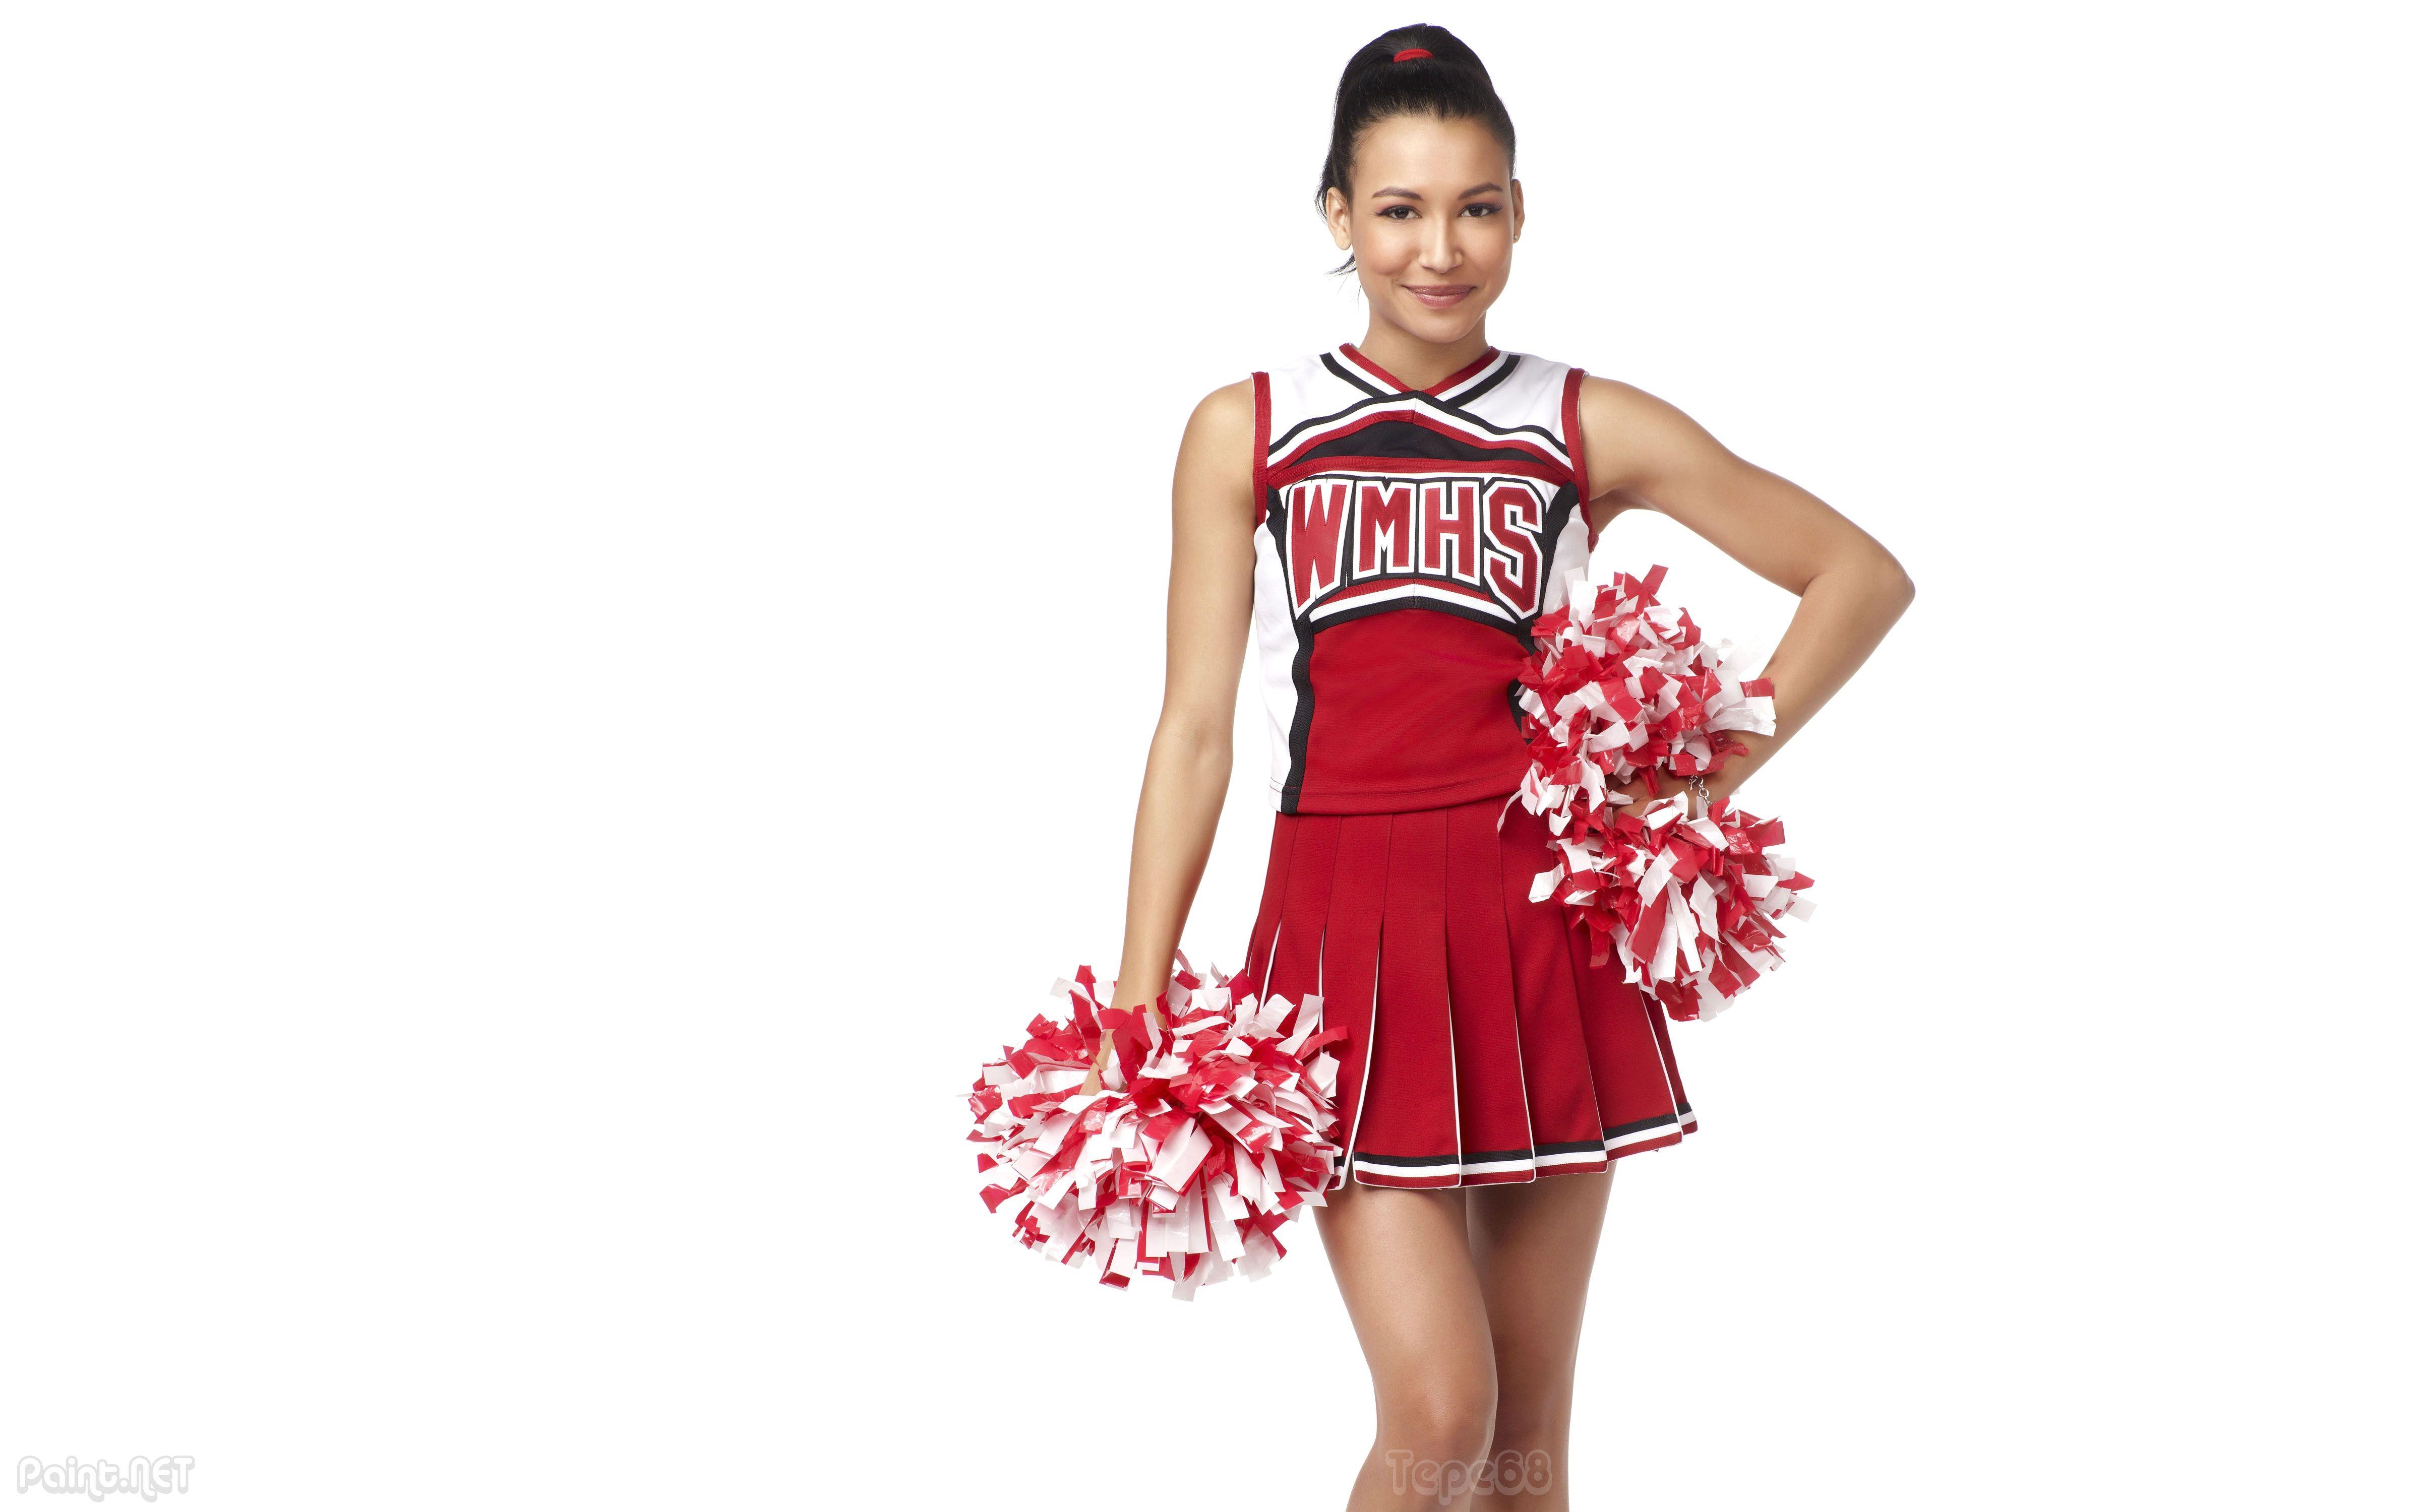 Cheer Wallpapers And Backgrounds 55 images